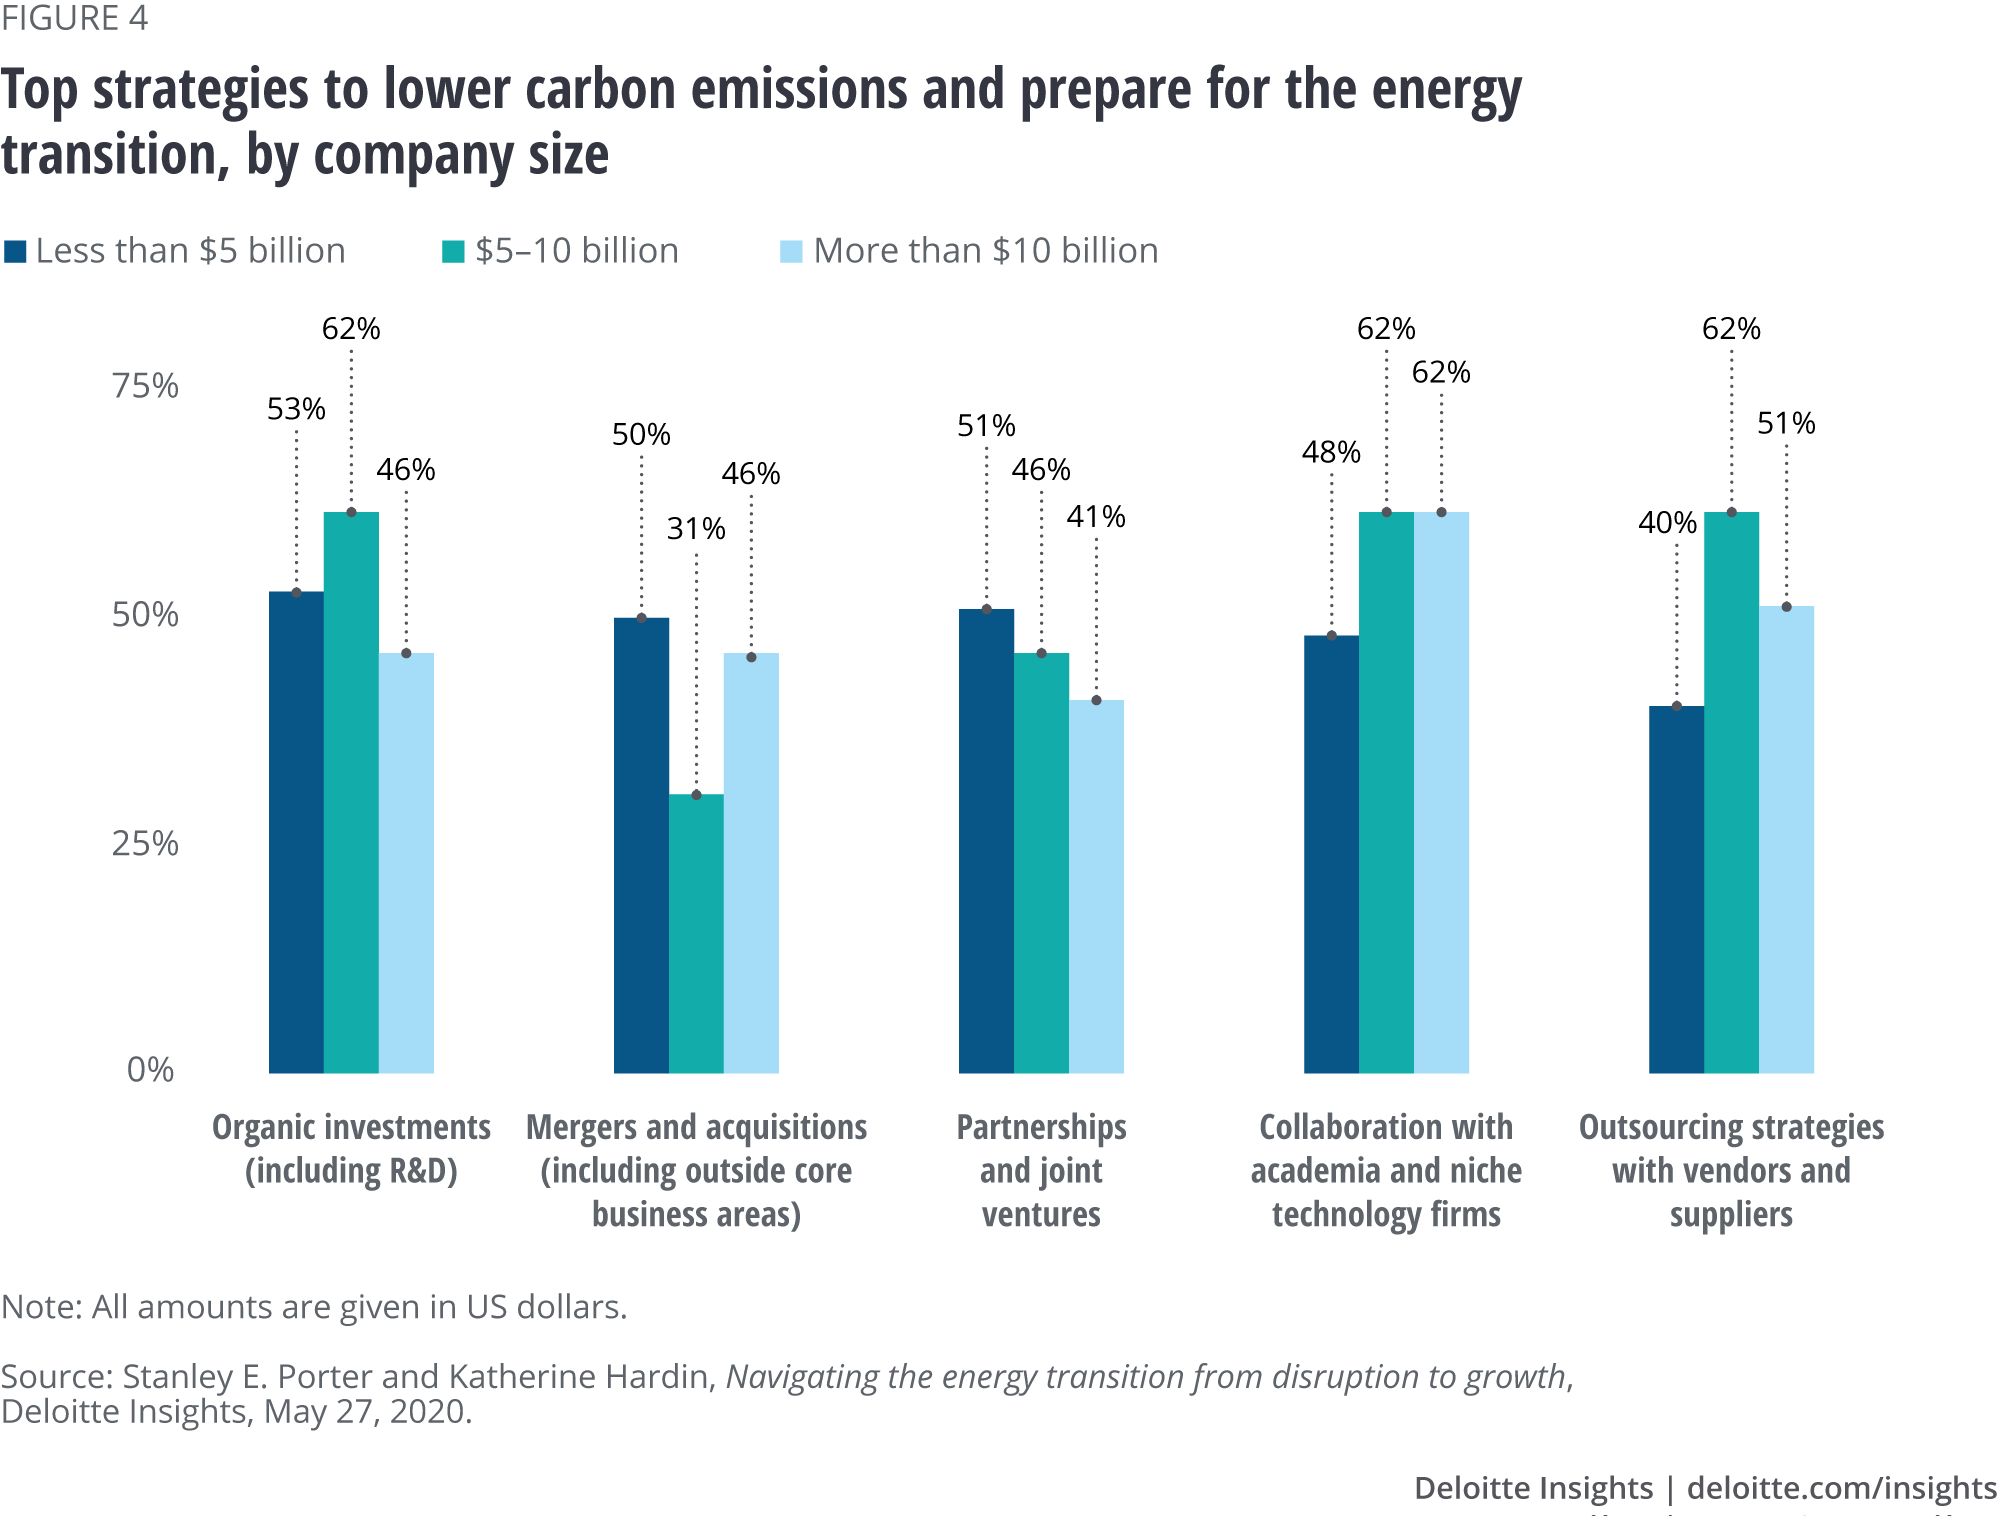 Top strategies to lower carbon emissions and prepare for the energy transition by company size